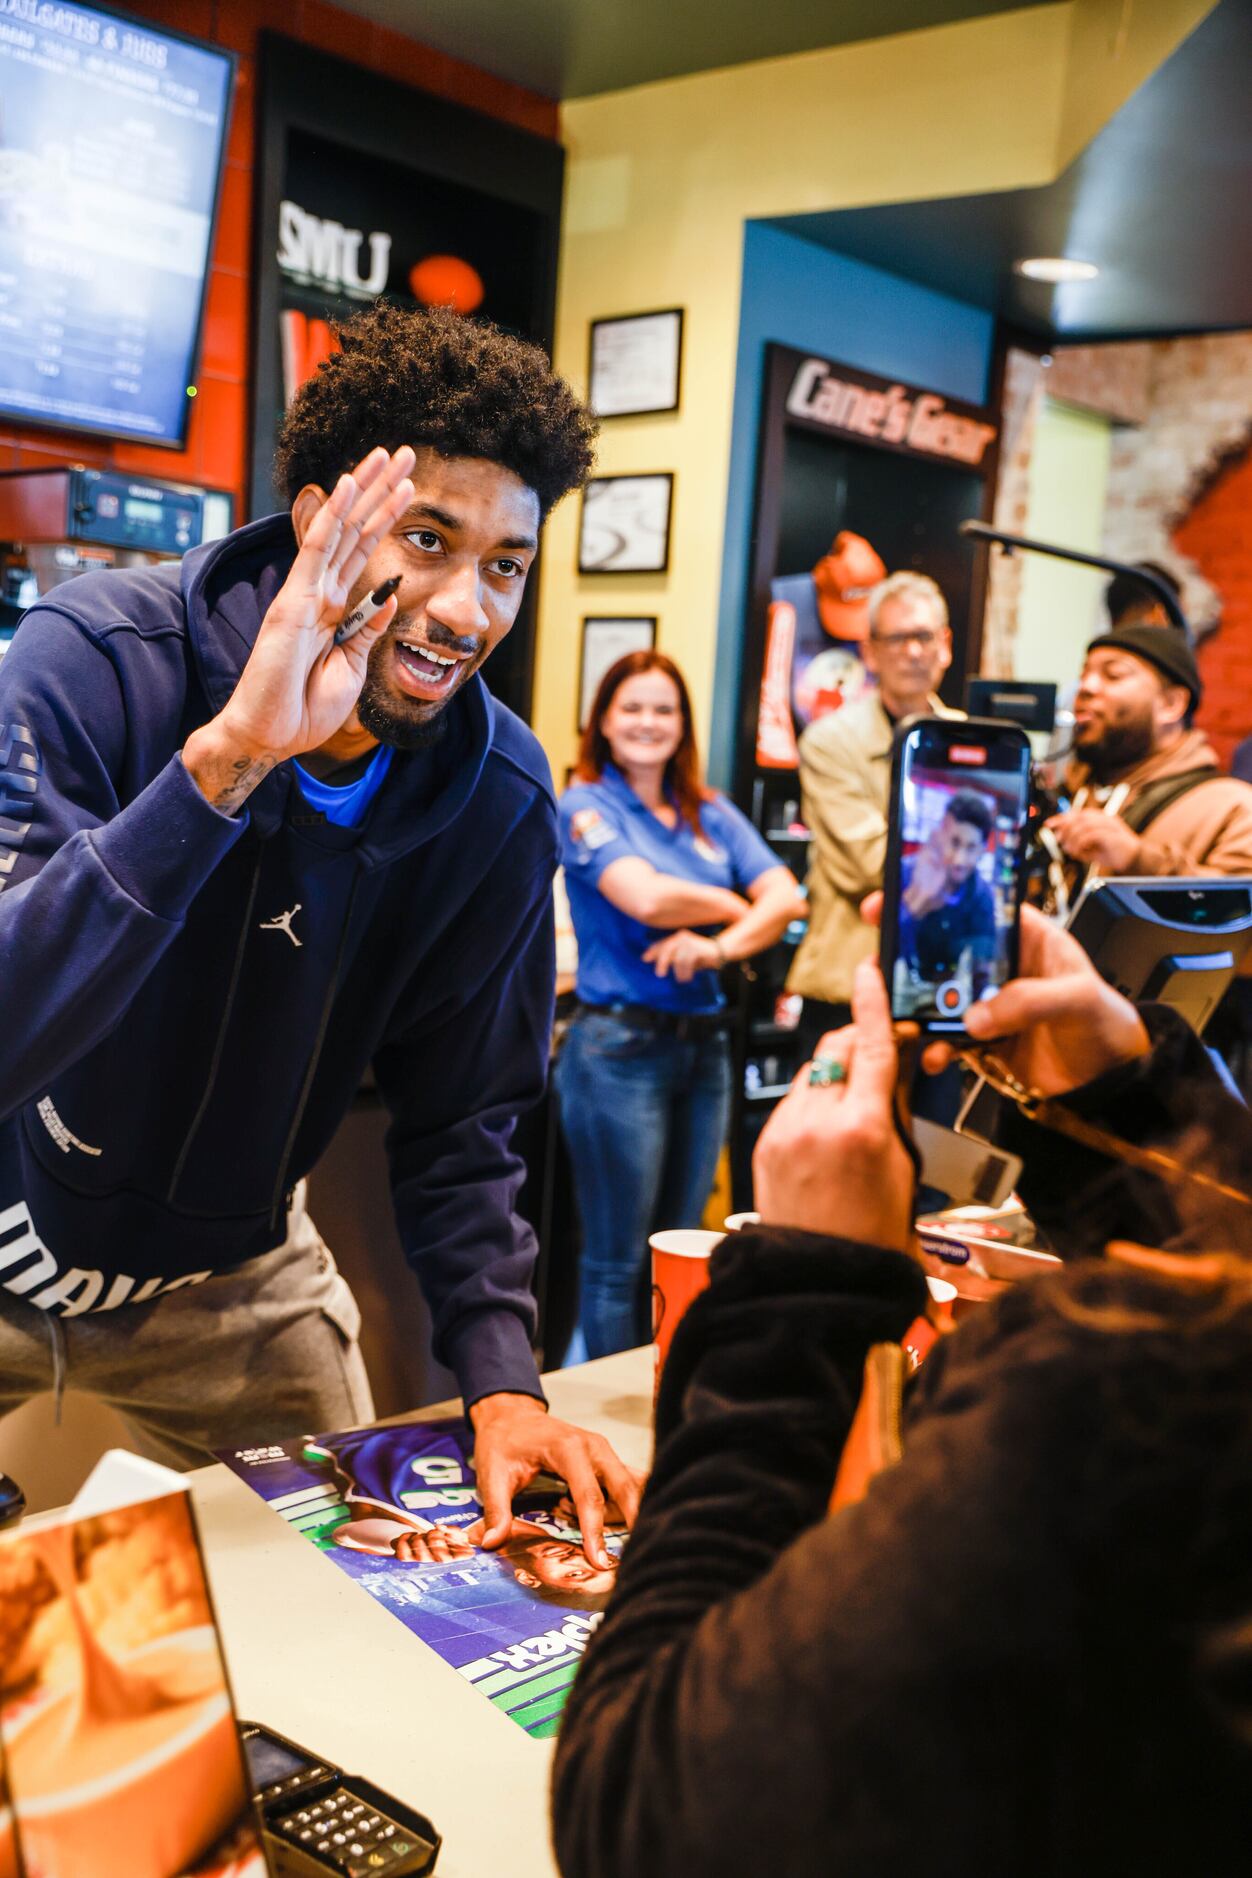 Mavericks player Christian Wood gives an autograph to a costumer at the Raising Cane’s in...